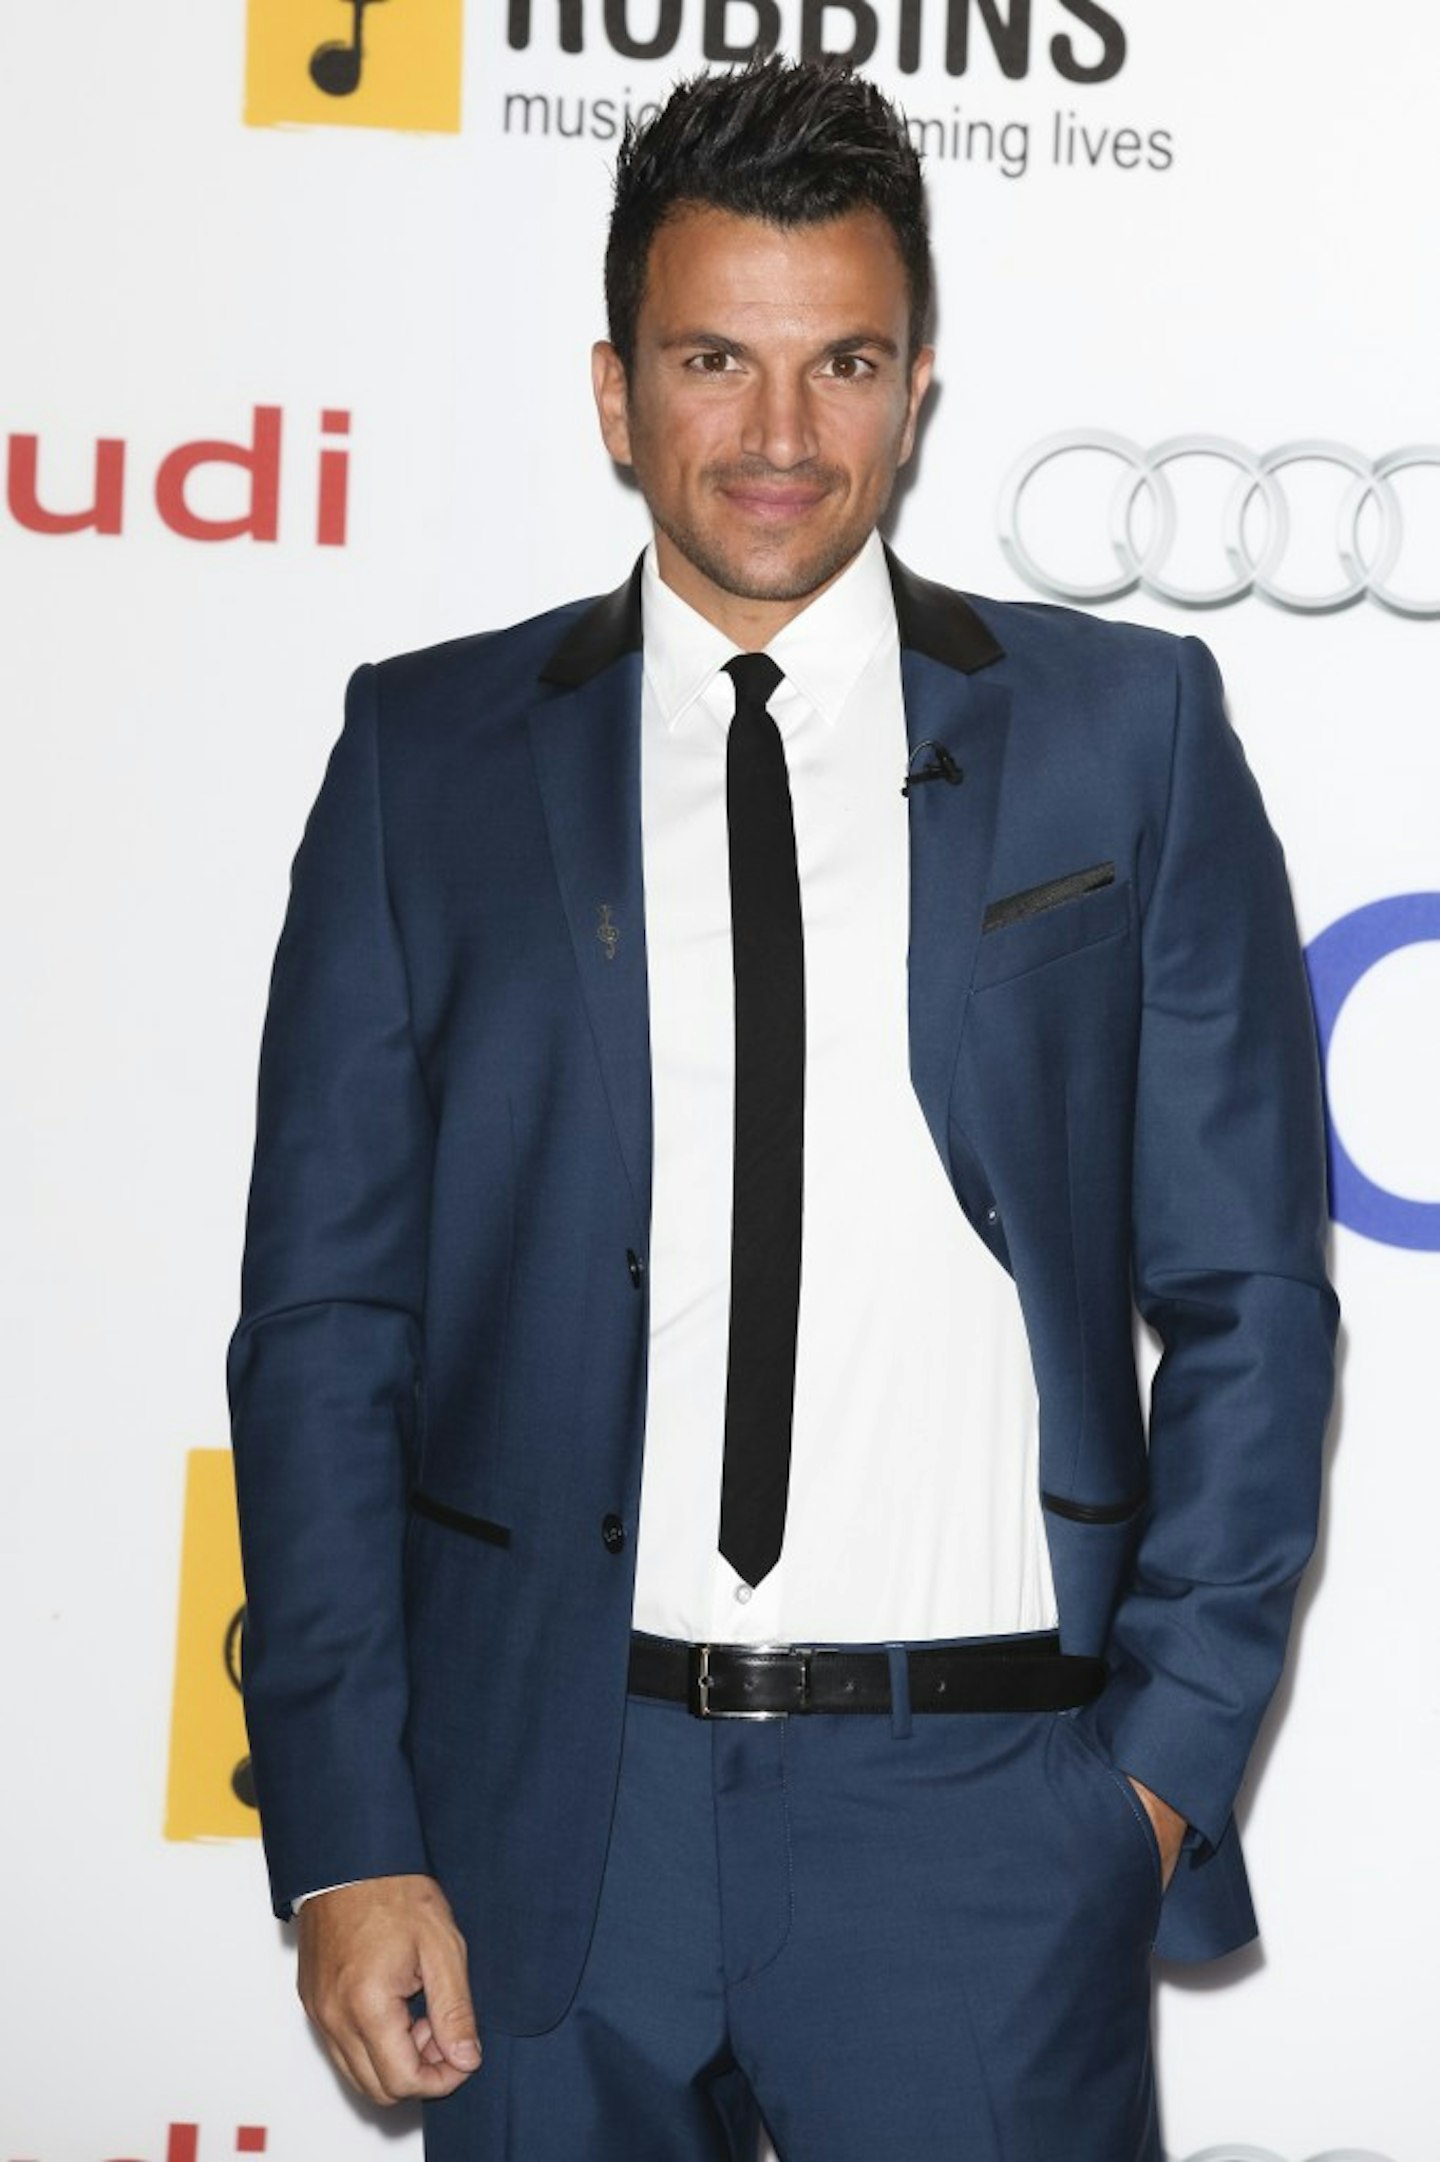 Is Peter Andre Set To Become A Stay-At-Home Dad?